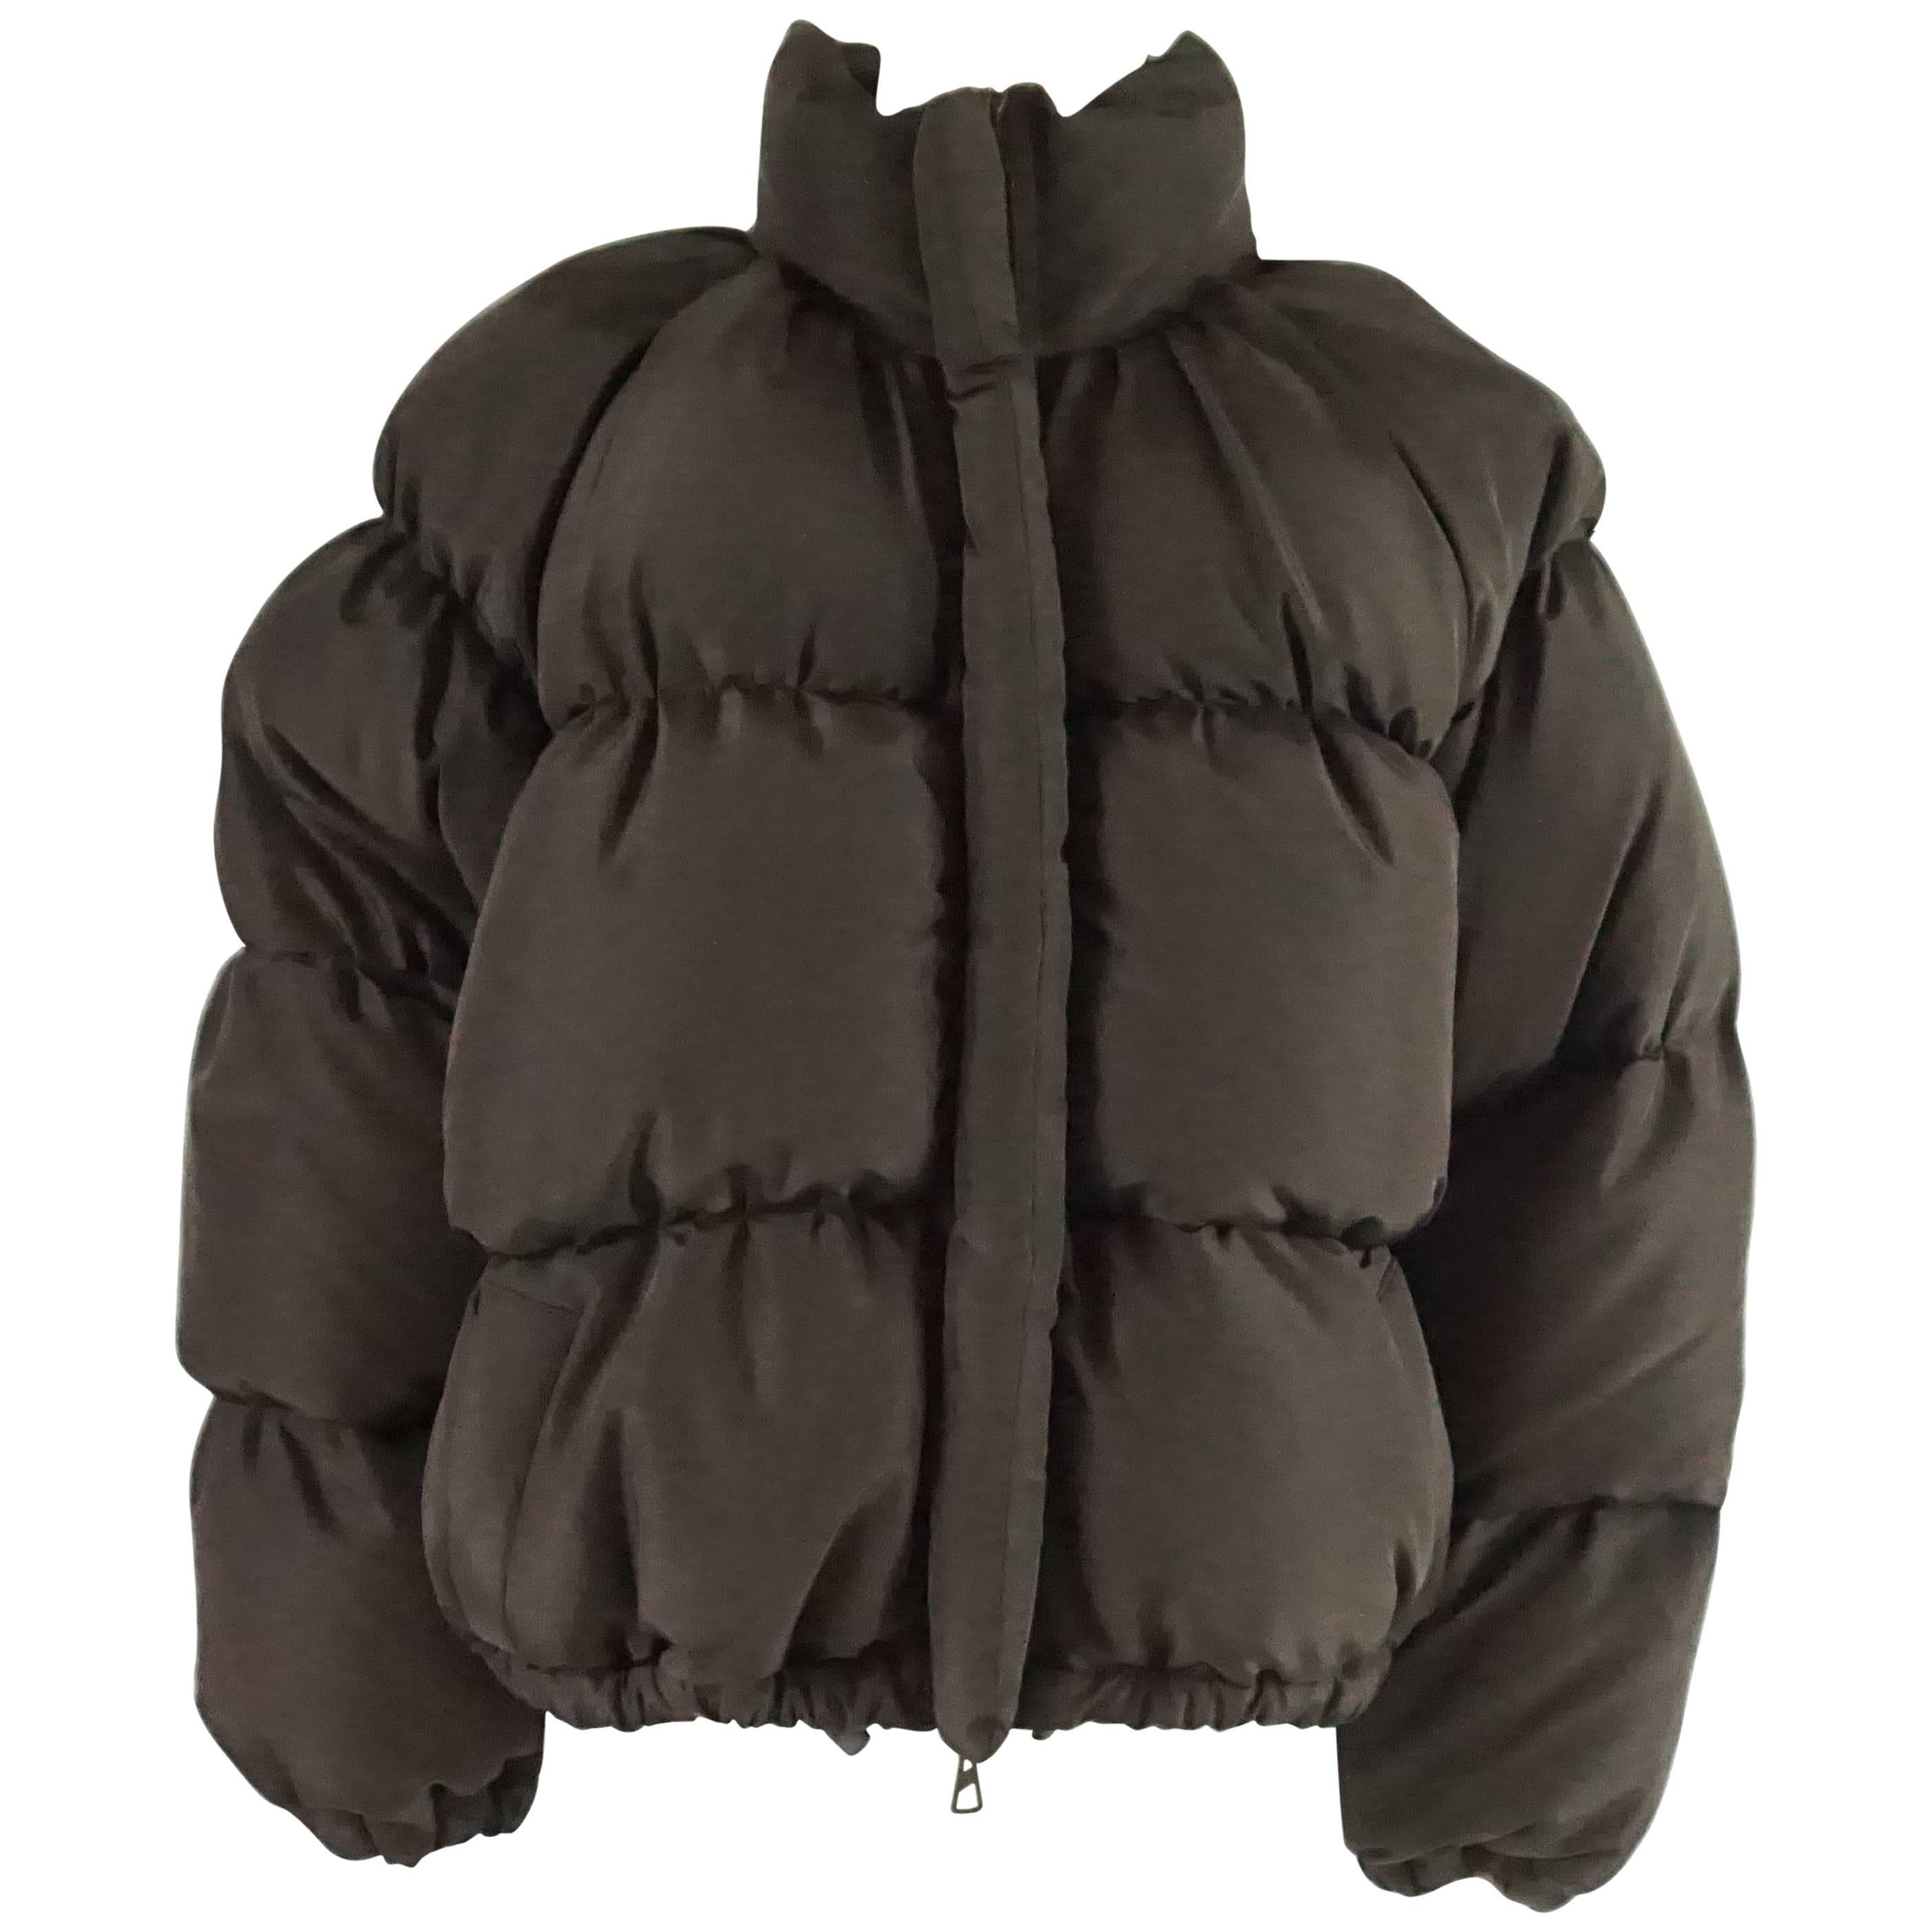 Jean Paul Gaultier Brown Puffer Jacket with Removable Hood - M/L